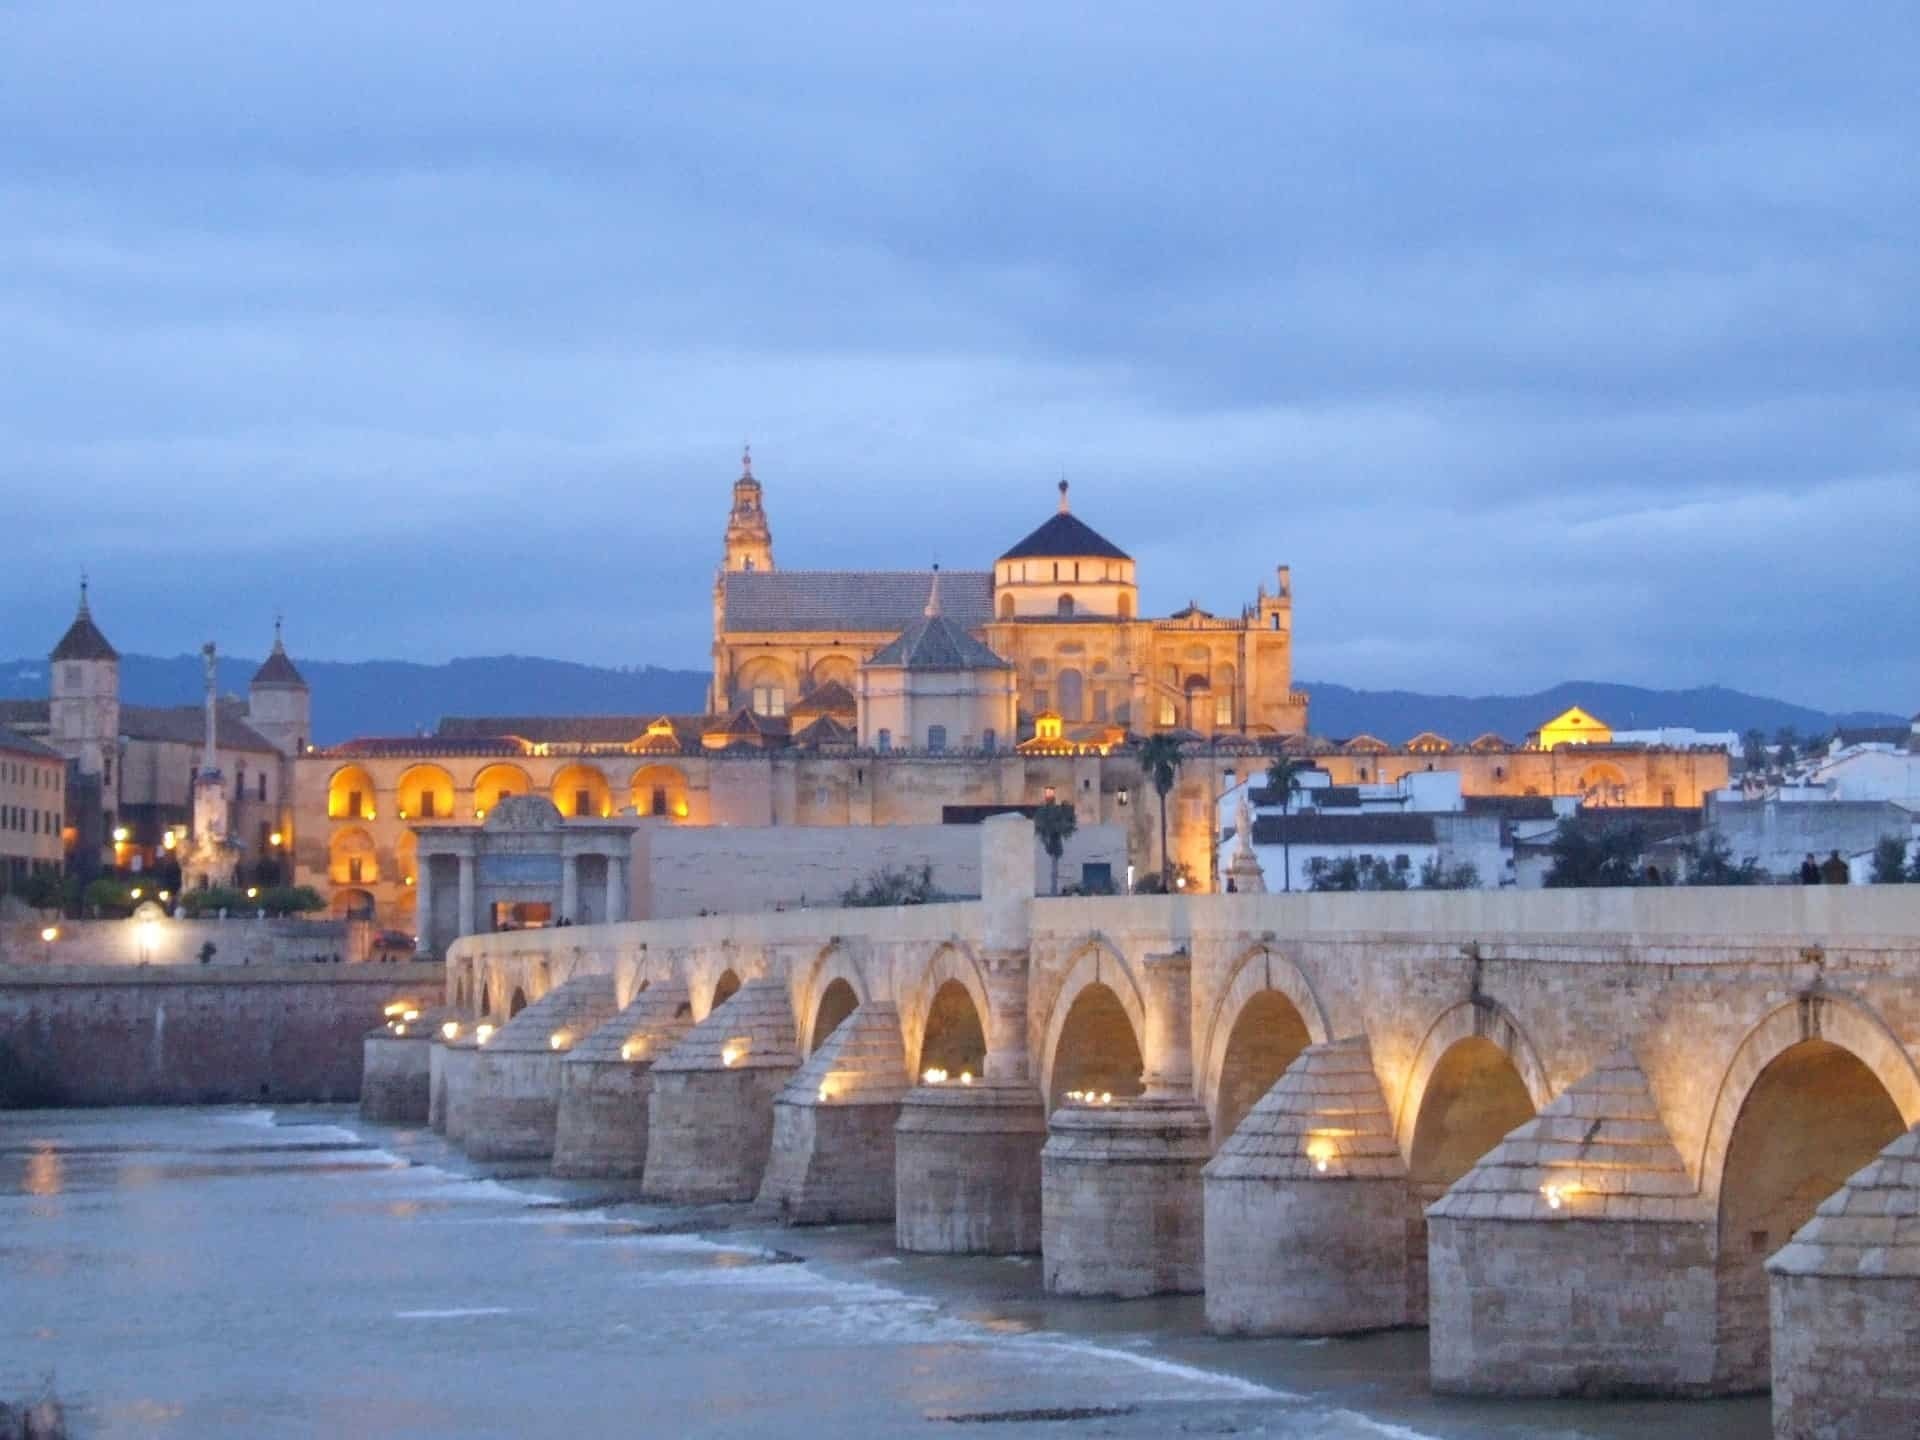 Great Mosque of Cordoba, Andalucia bike tour, Historical villages, Jerez wine country, 1920x1440 HD Desktop